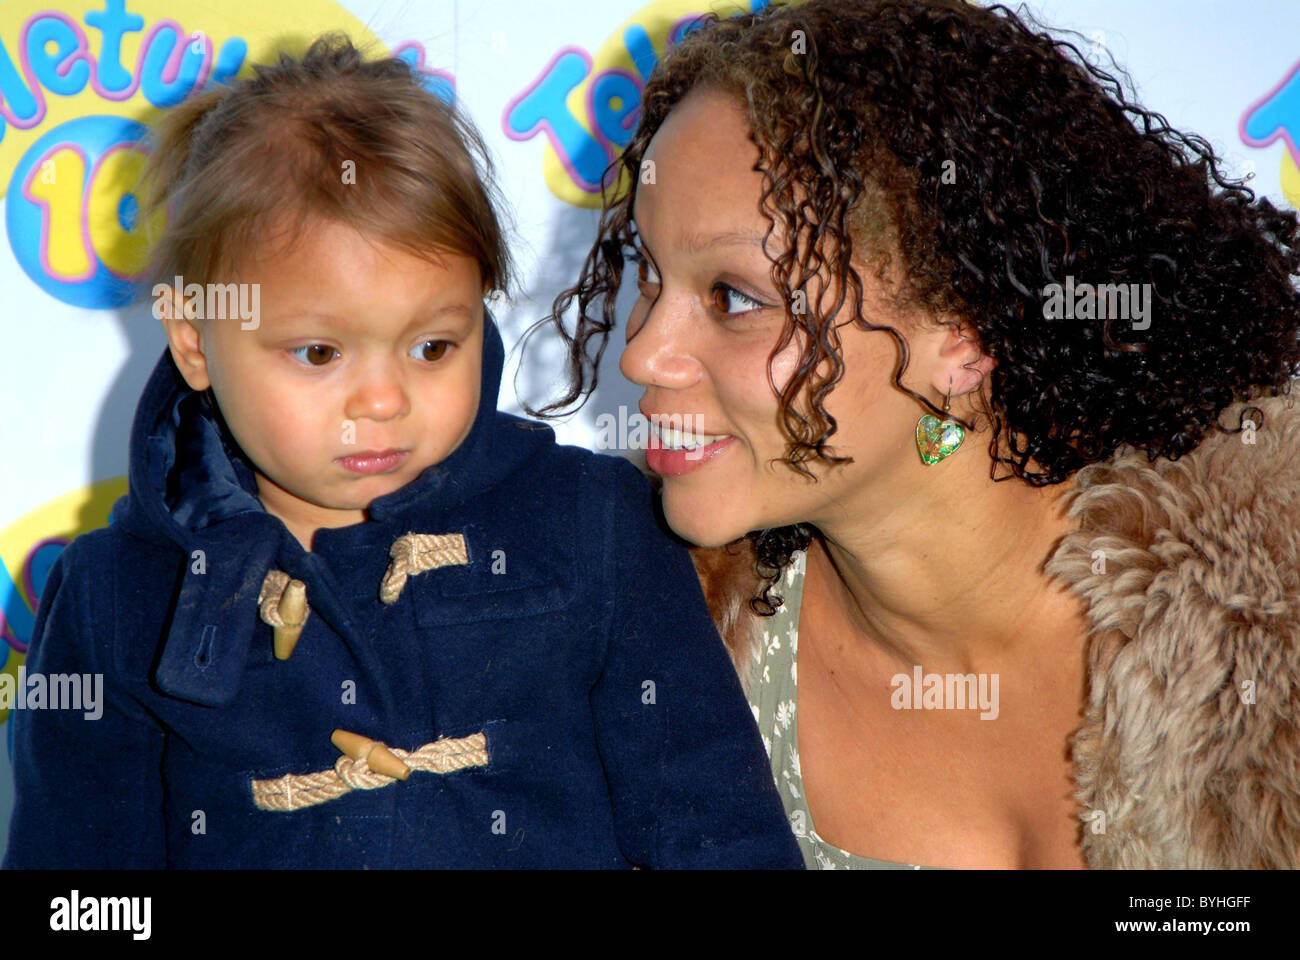 Angela Griffin Teletubbies' 10th Anniversary Celebration held at The Belvedere London, England - 21.03.07 : Vince Stock Photo